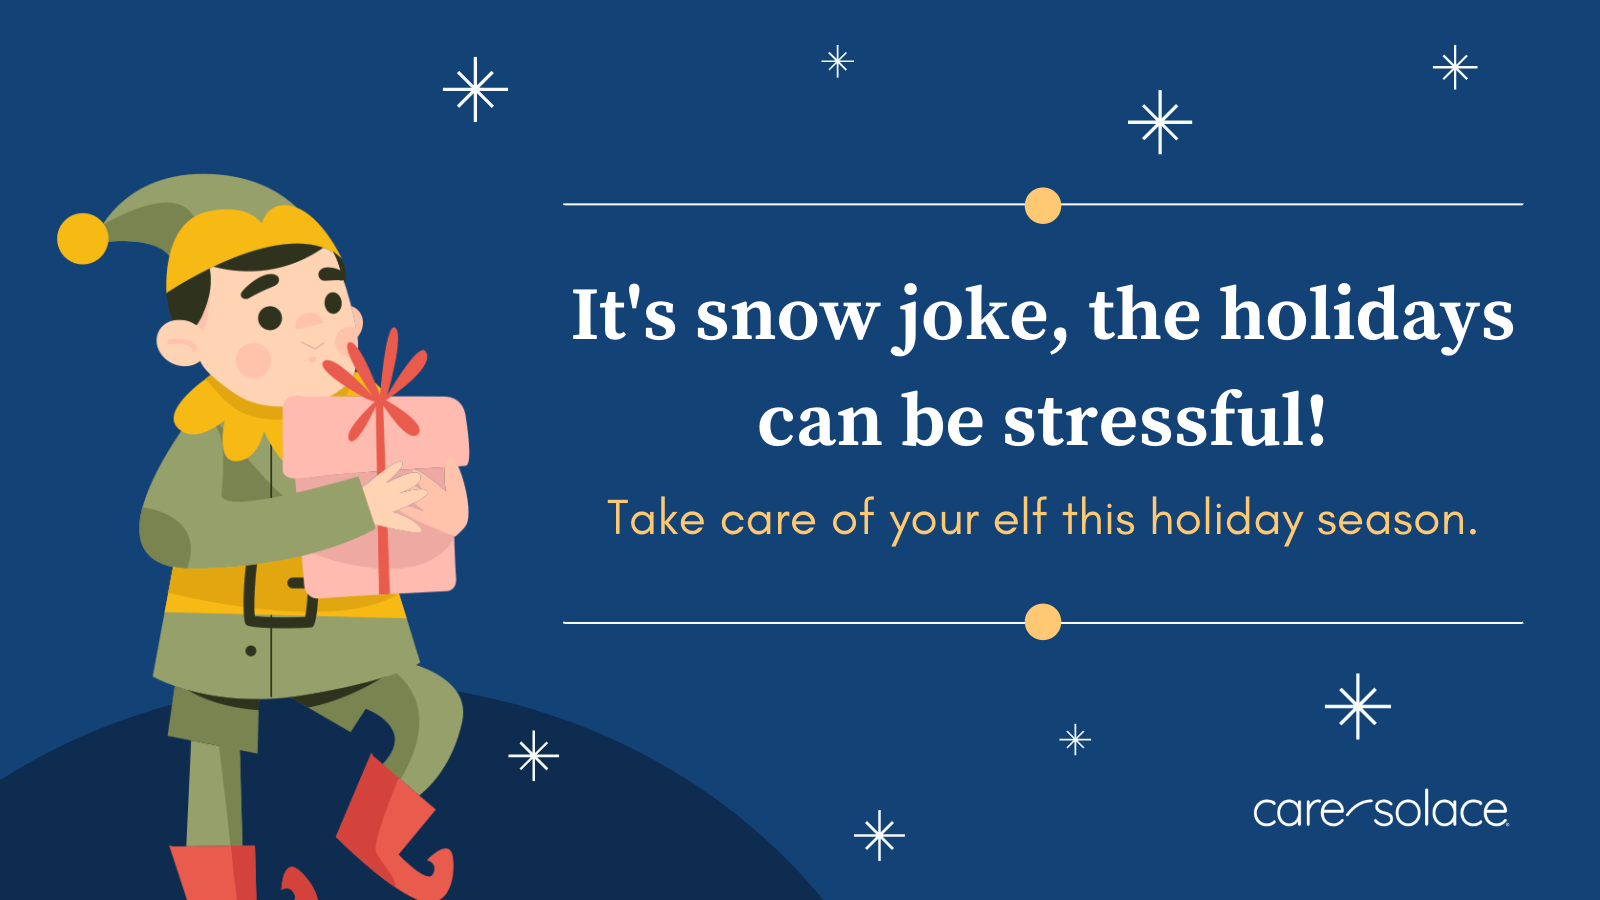 It's snow joke, the holidays can be stressful. Take care of your elf this holiday season.